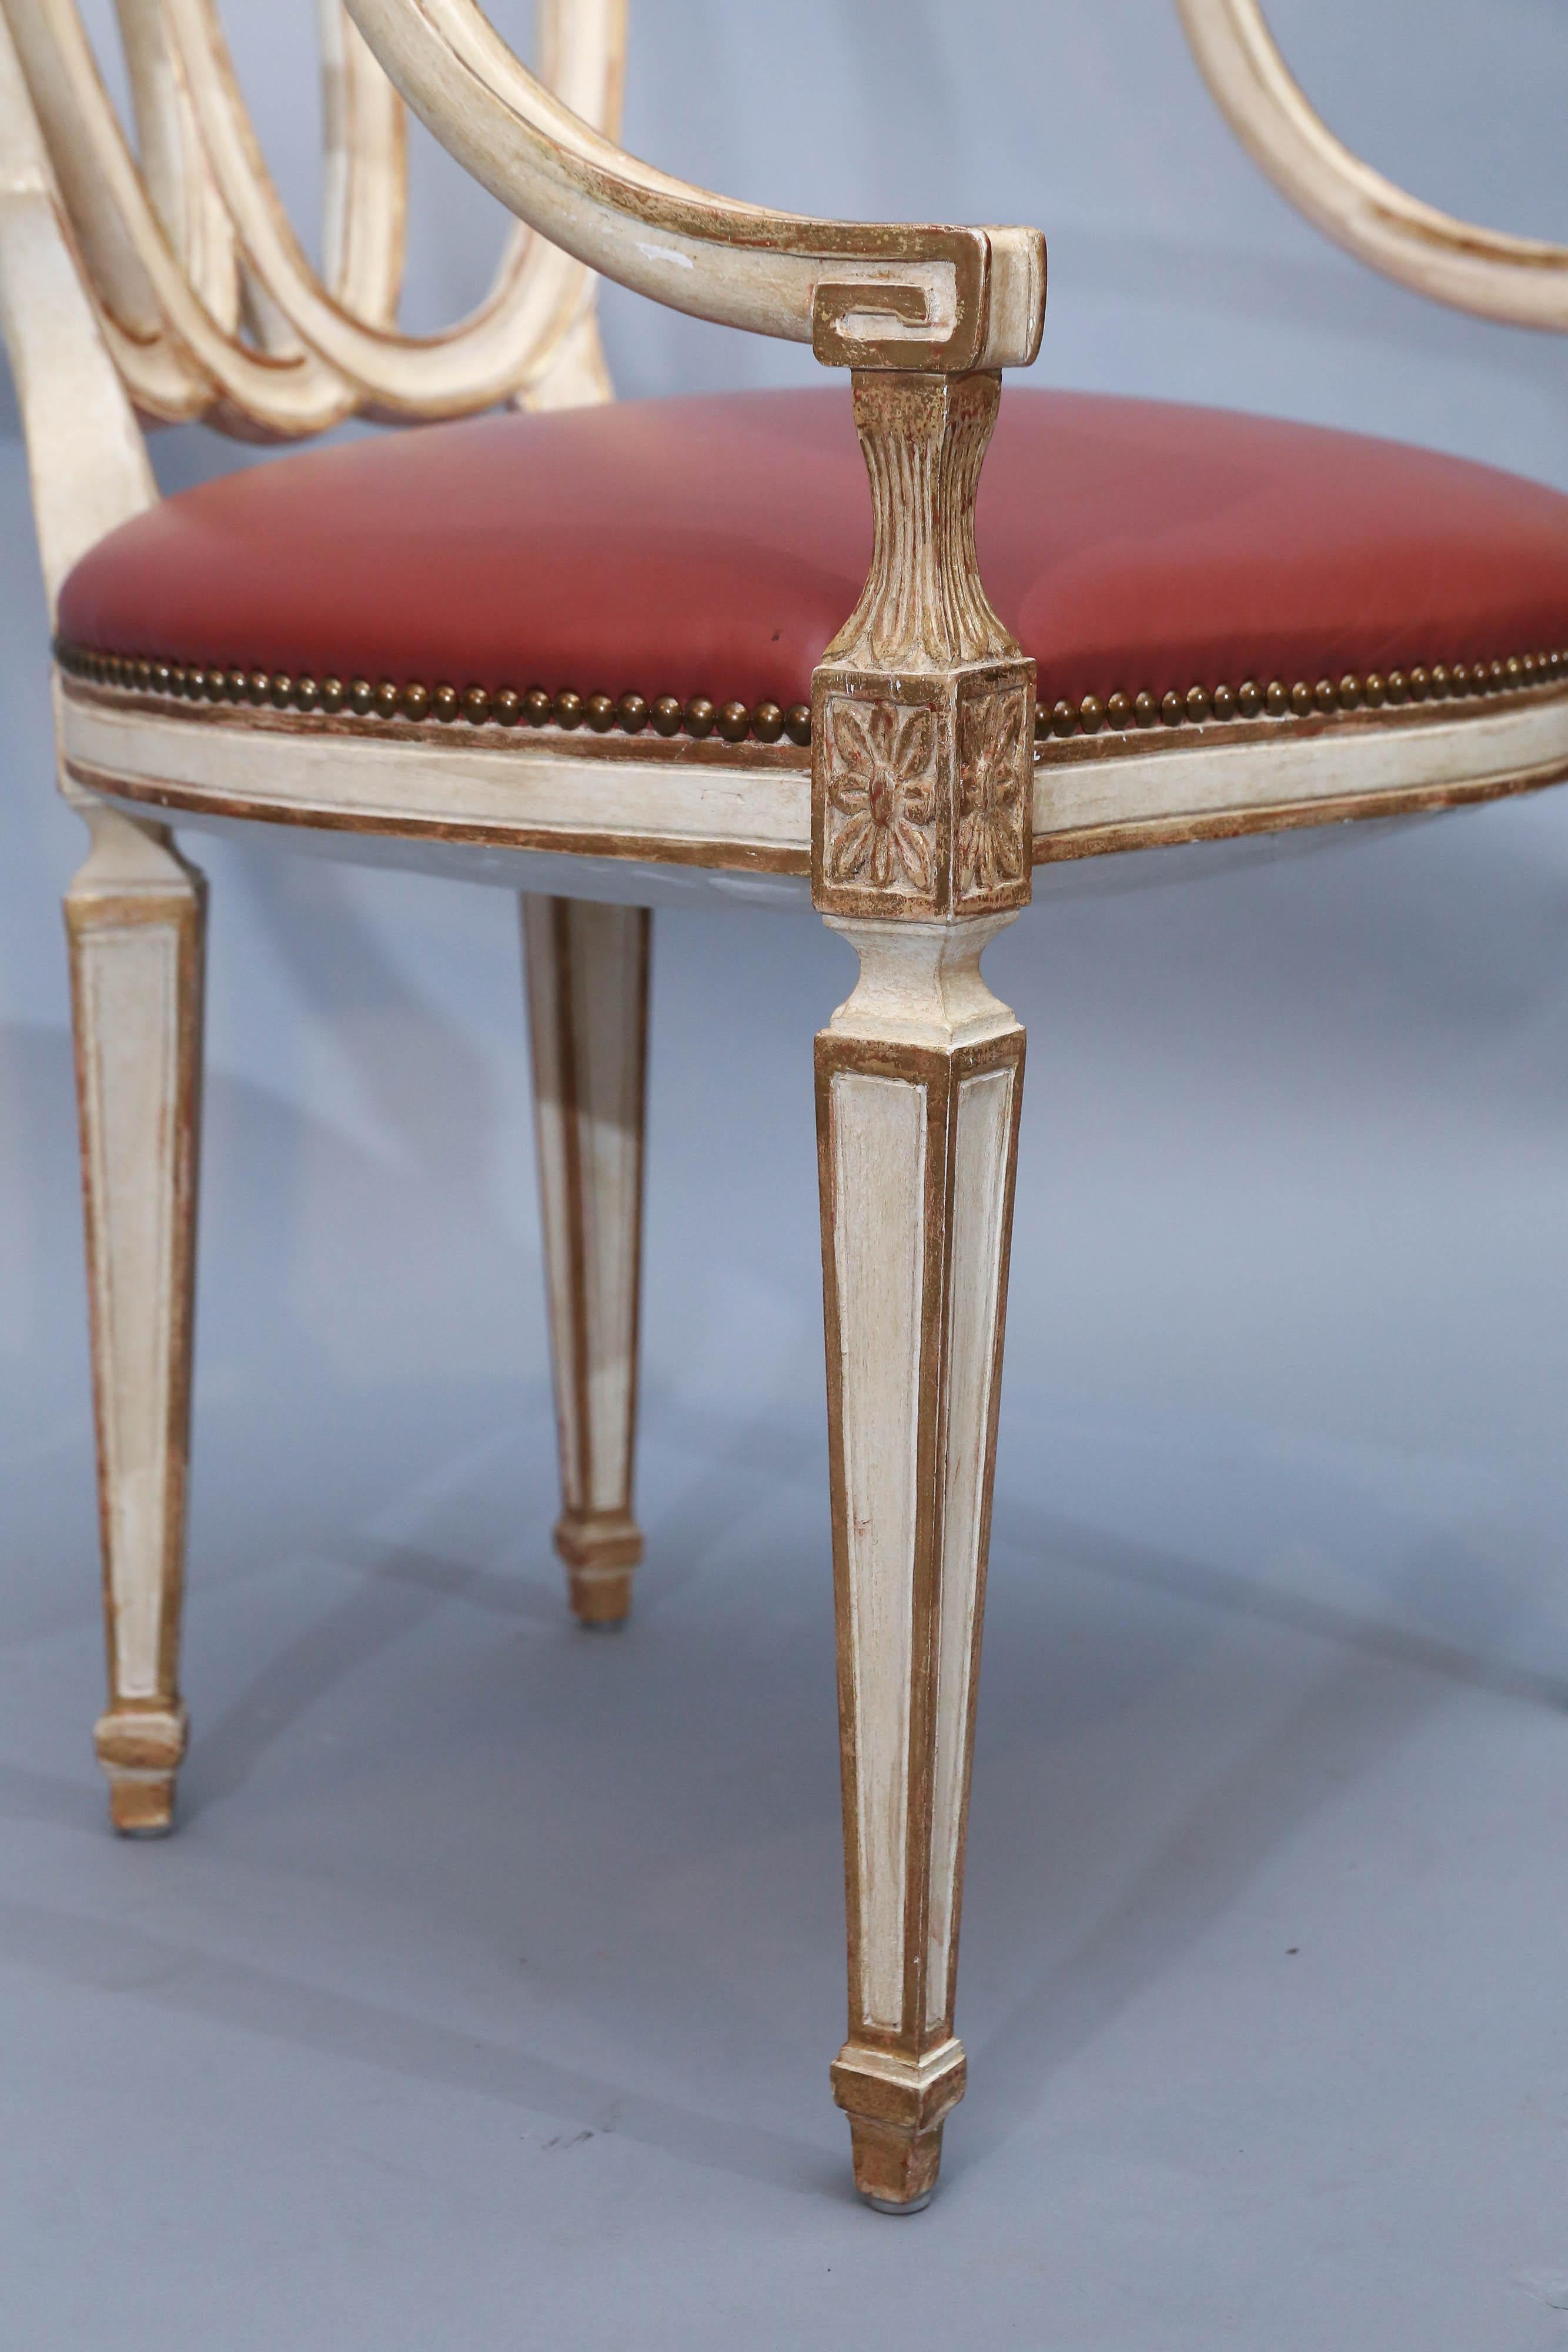 Set of eight Ribbon-back arm dining chairs feature tapered legs, front and back, rosettes on corner blocks with carved acanthus leaves below step-back arms.
Finish is an aged white with gold trim out-lining the fine details of chairs.
Step-back arms